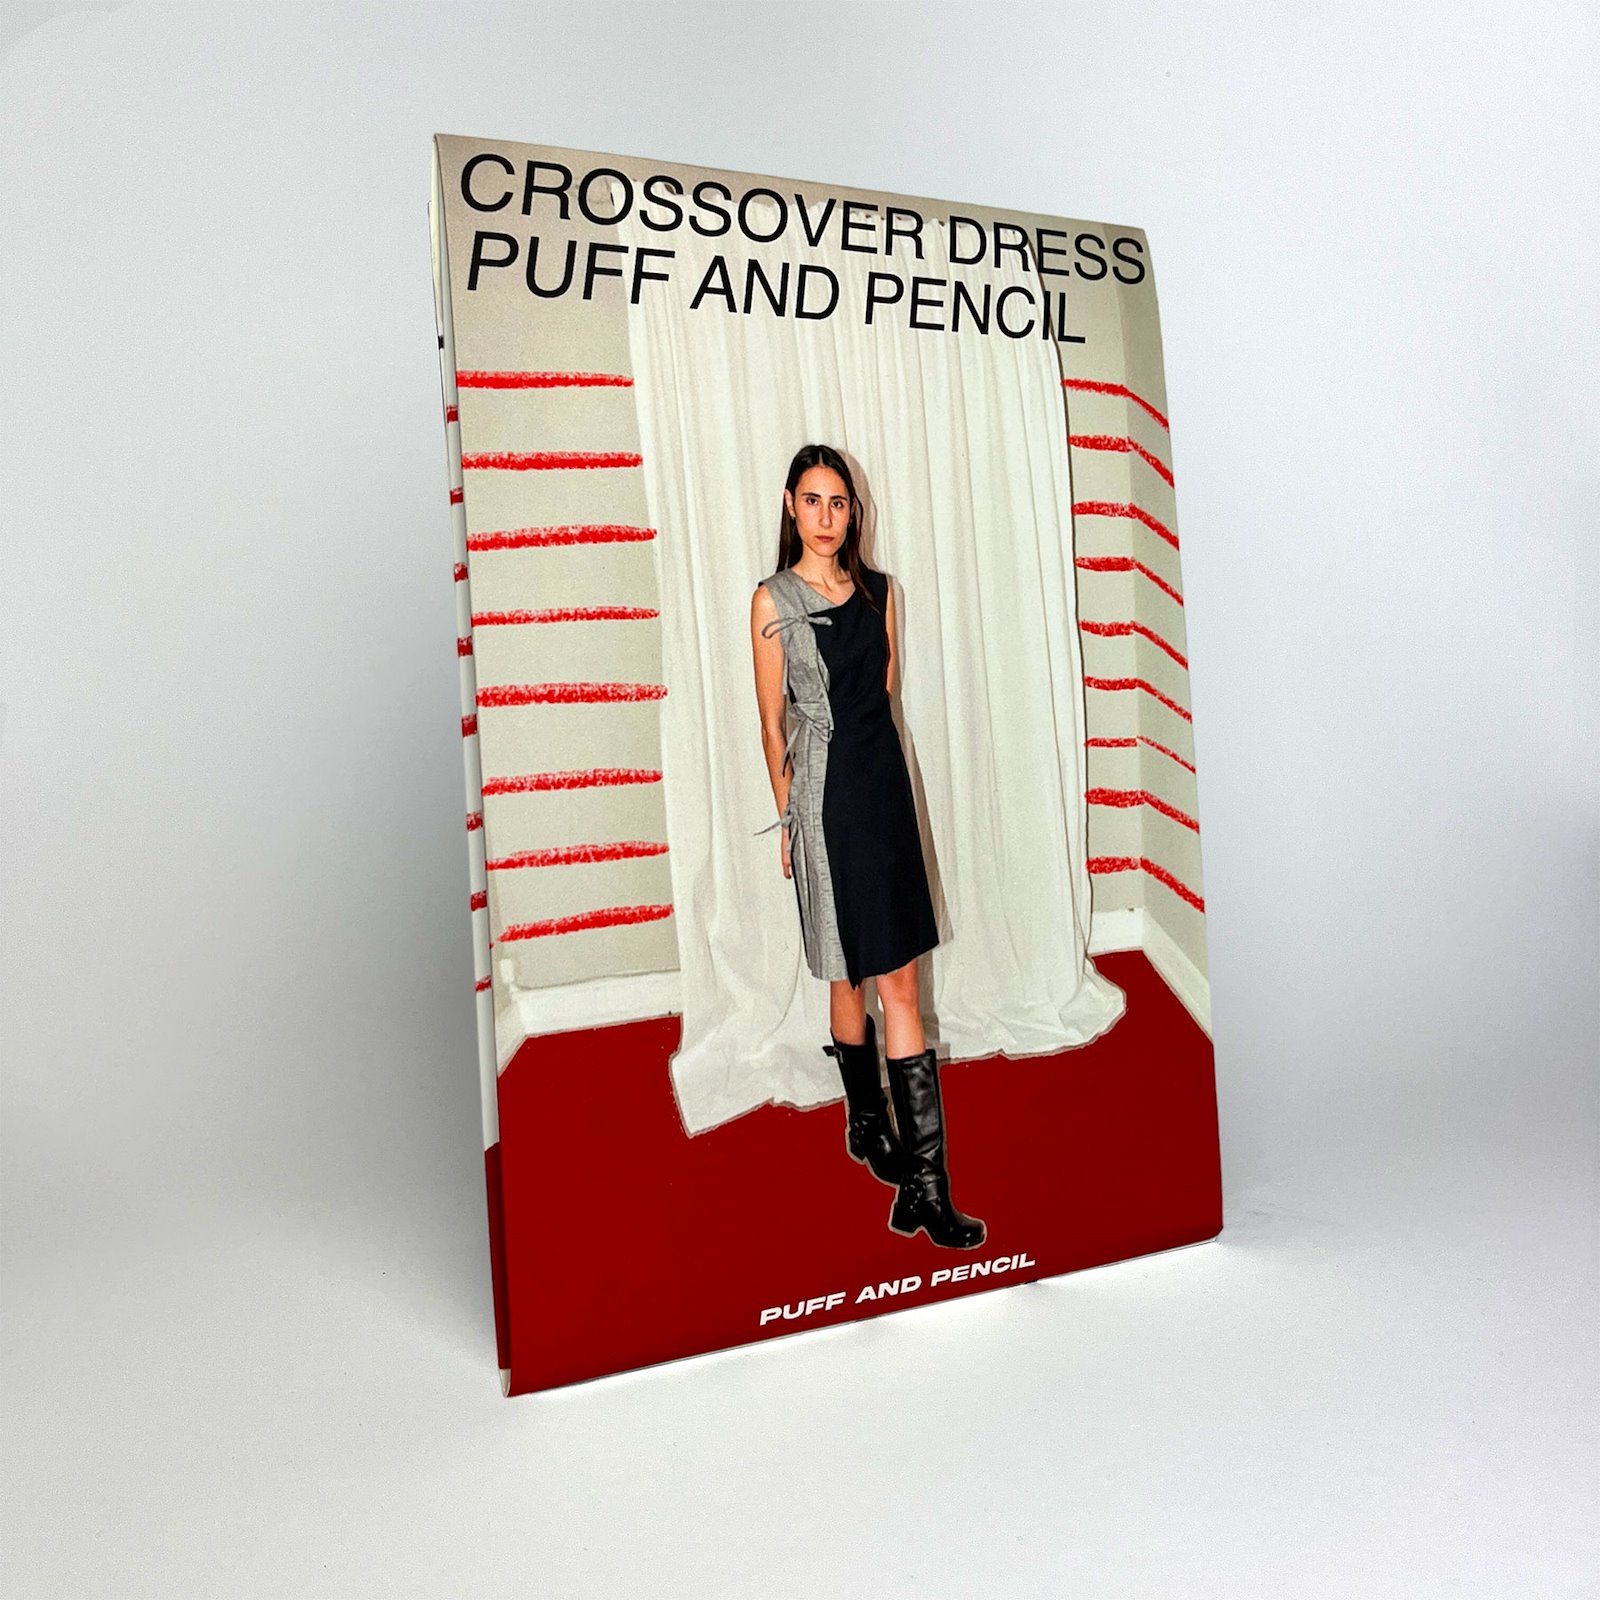 Puff and Pencil sewing pattern "Crossover dress" 1100300_pack.jpg